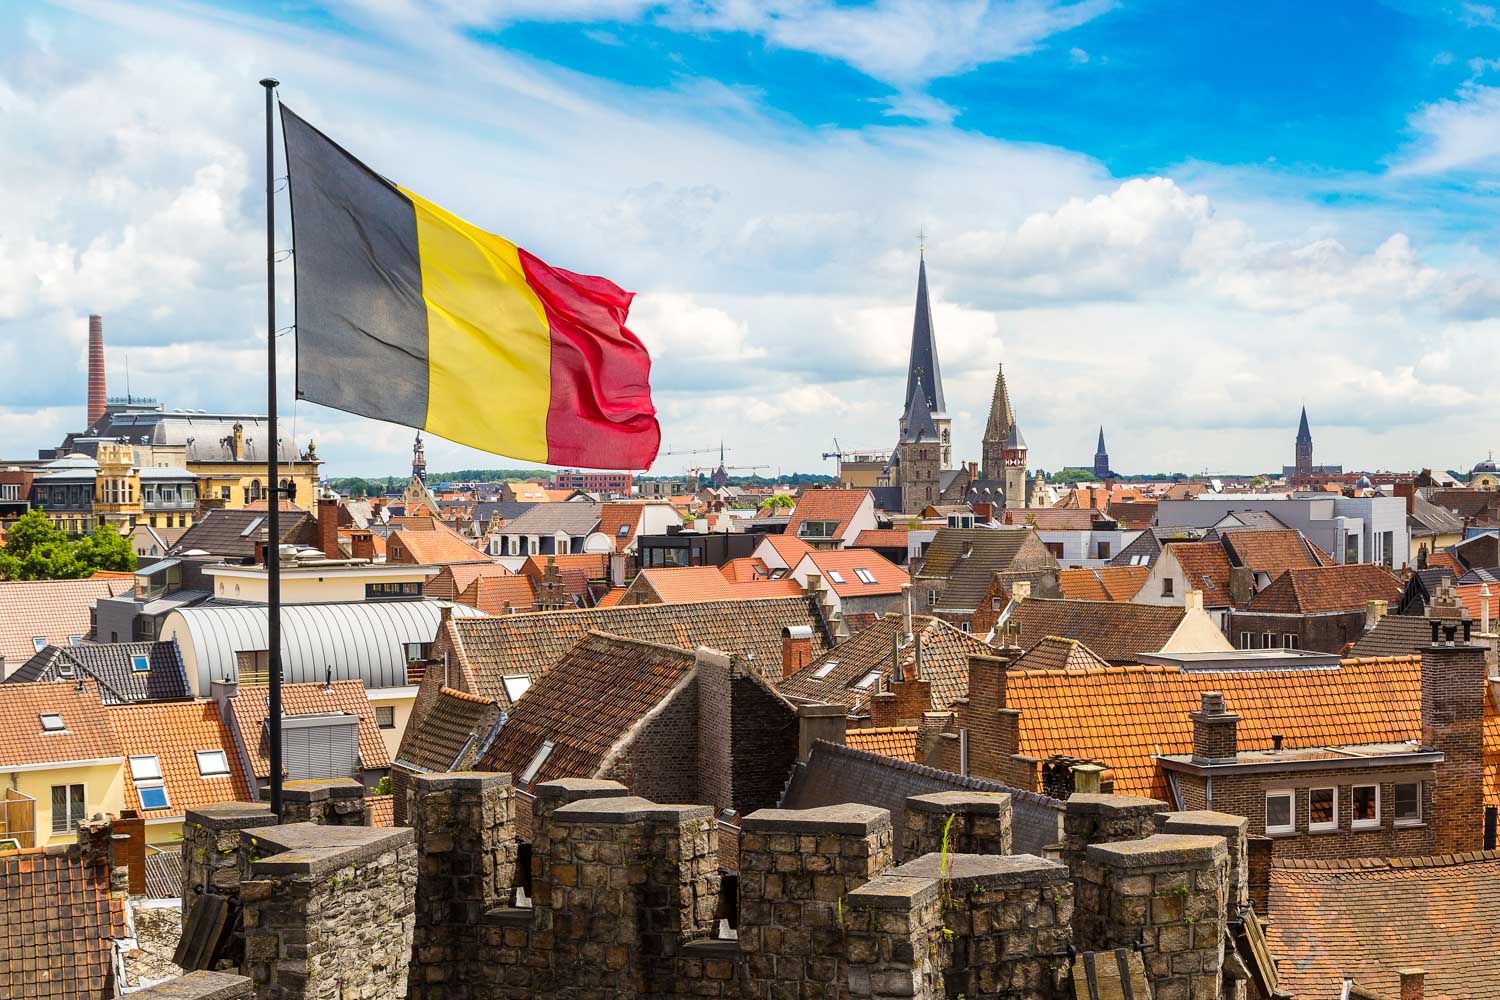 View across the rooftops of Ghent from the medieval castle Gravensteen on a summer day with the Belgian flag flying in the foreground - my guide to Belgium with kids